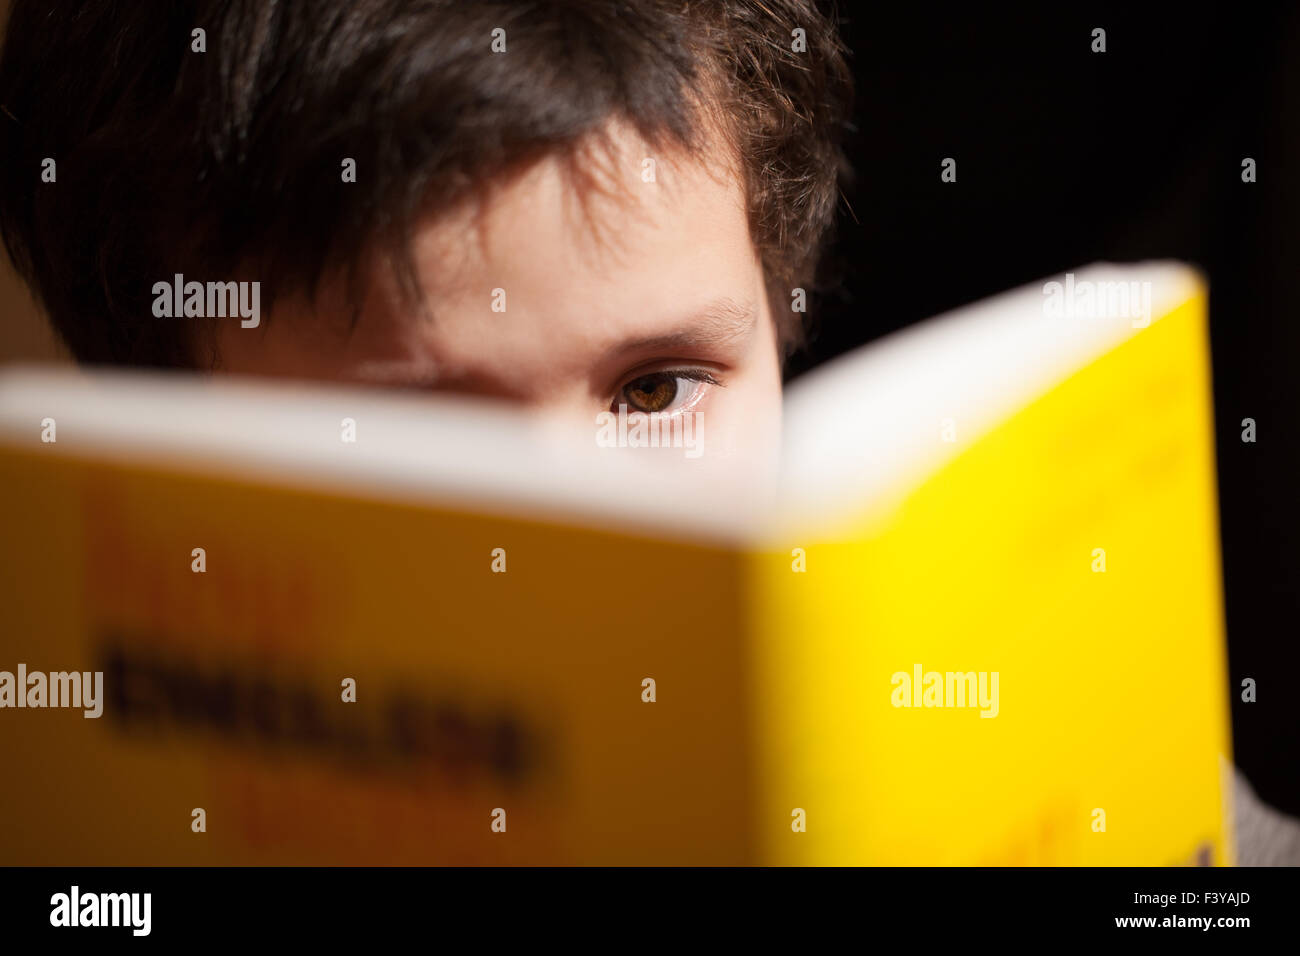 Young boy concentrating on reading a book Stock Photo